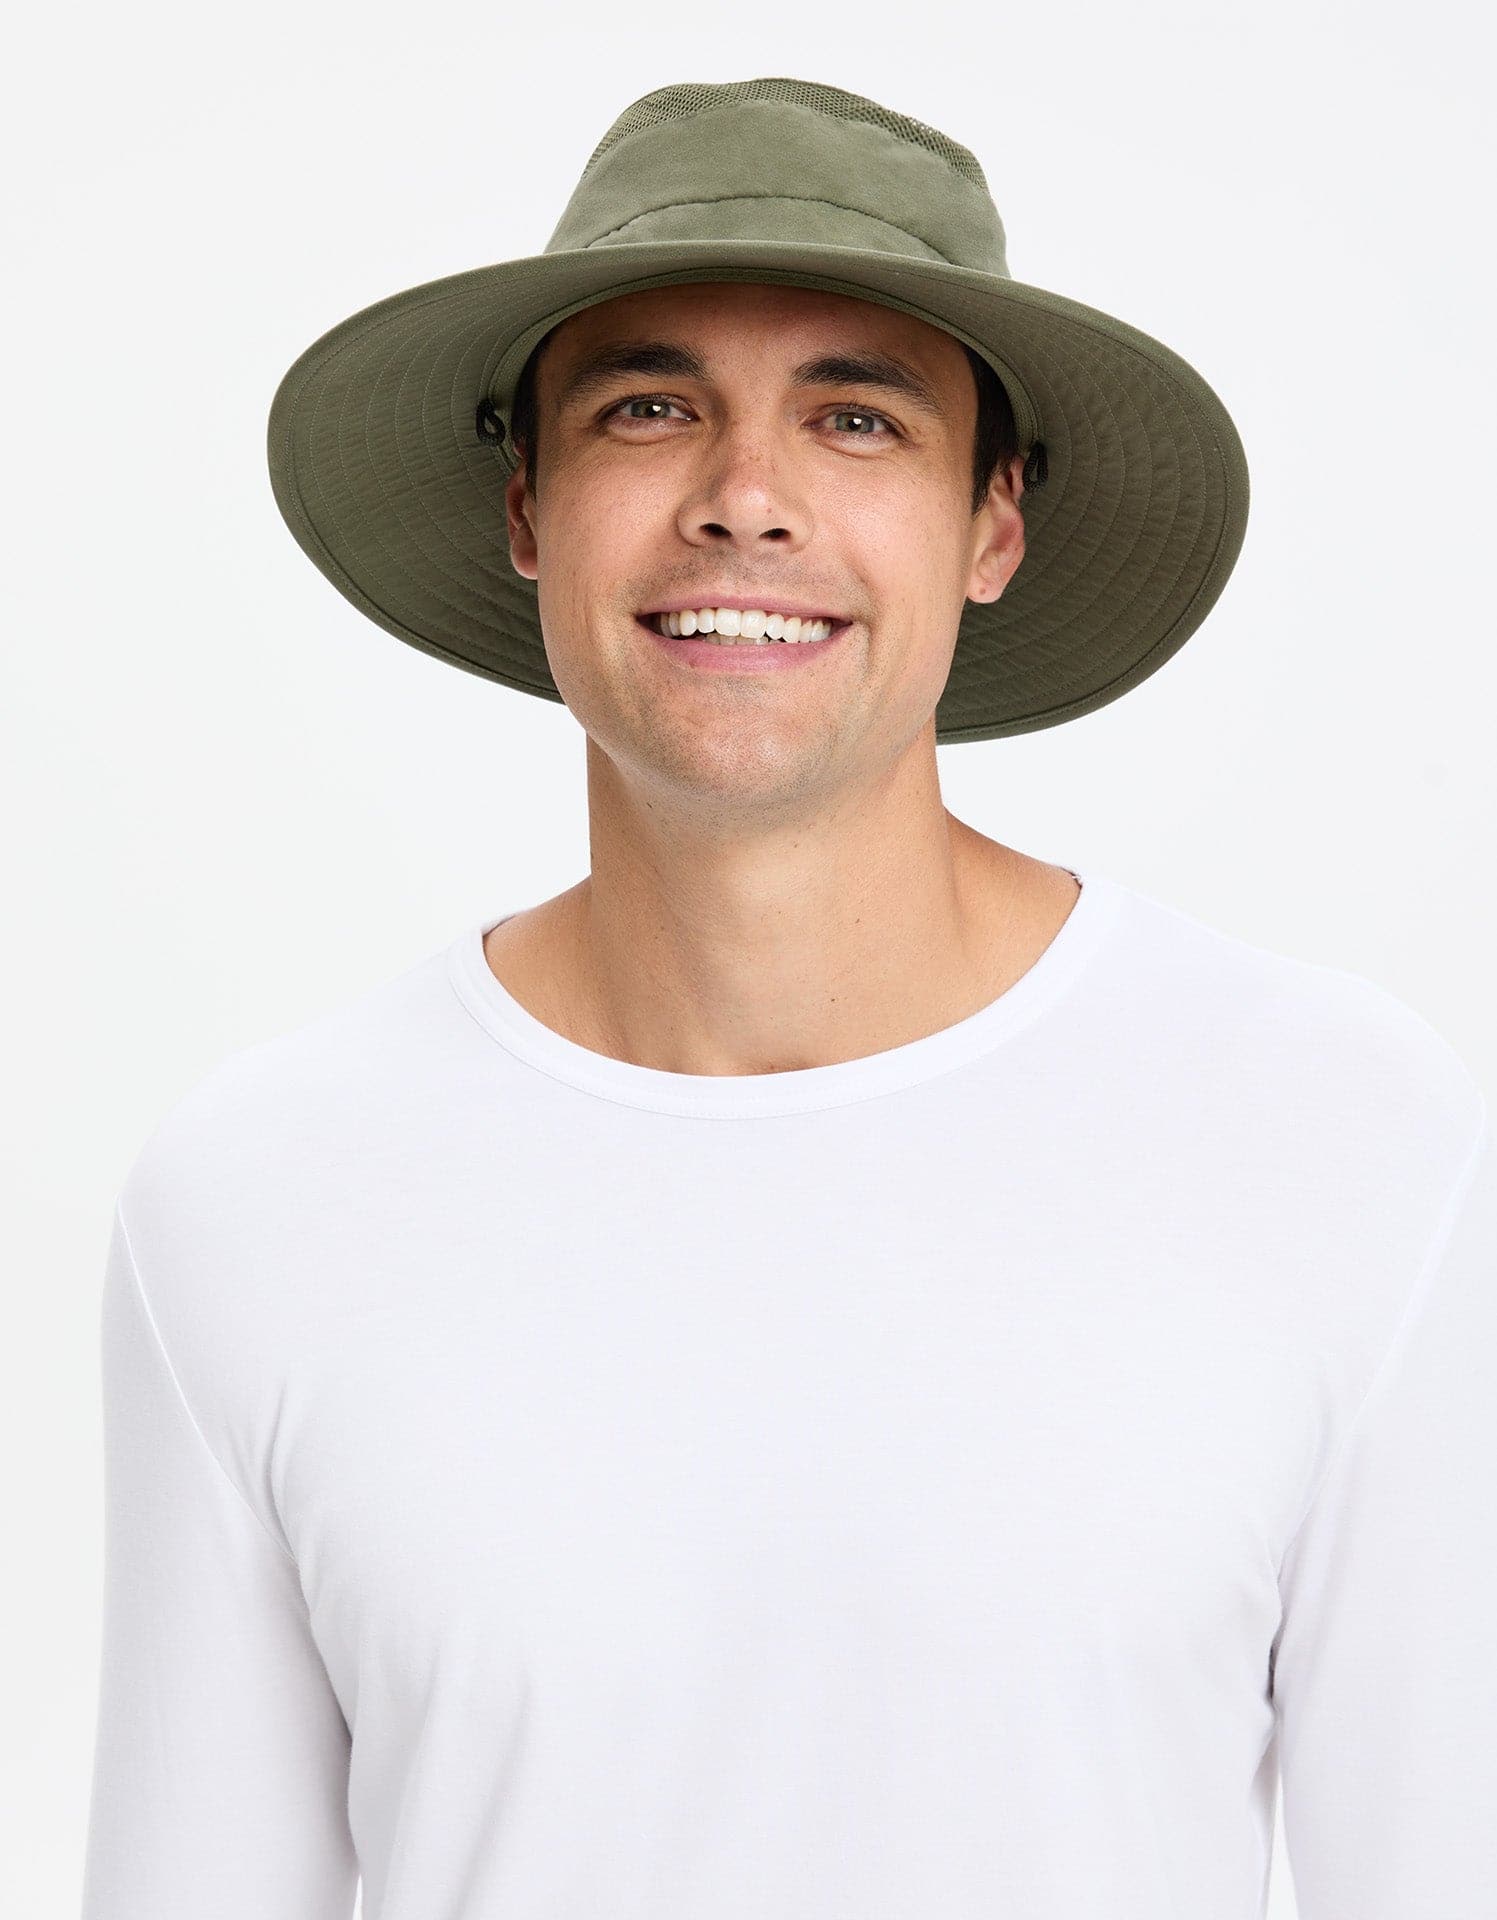 Everyday Broad Brim Sun Hat With Pockets for Men